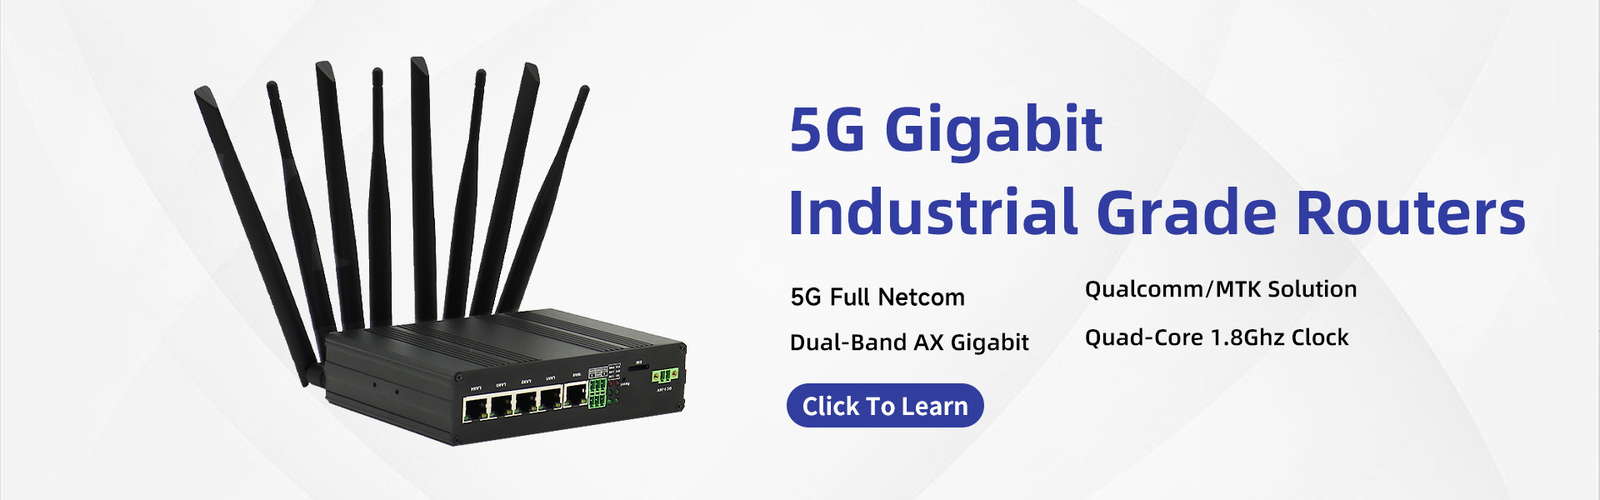 router 5G industrial